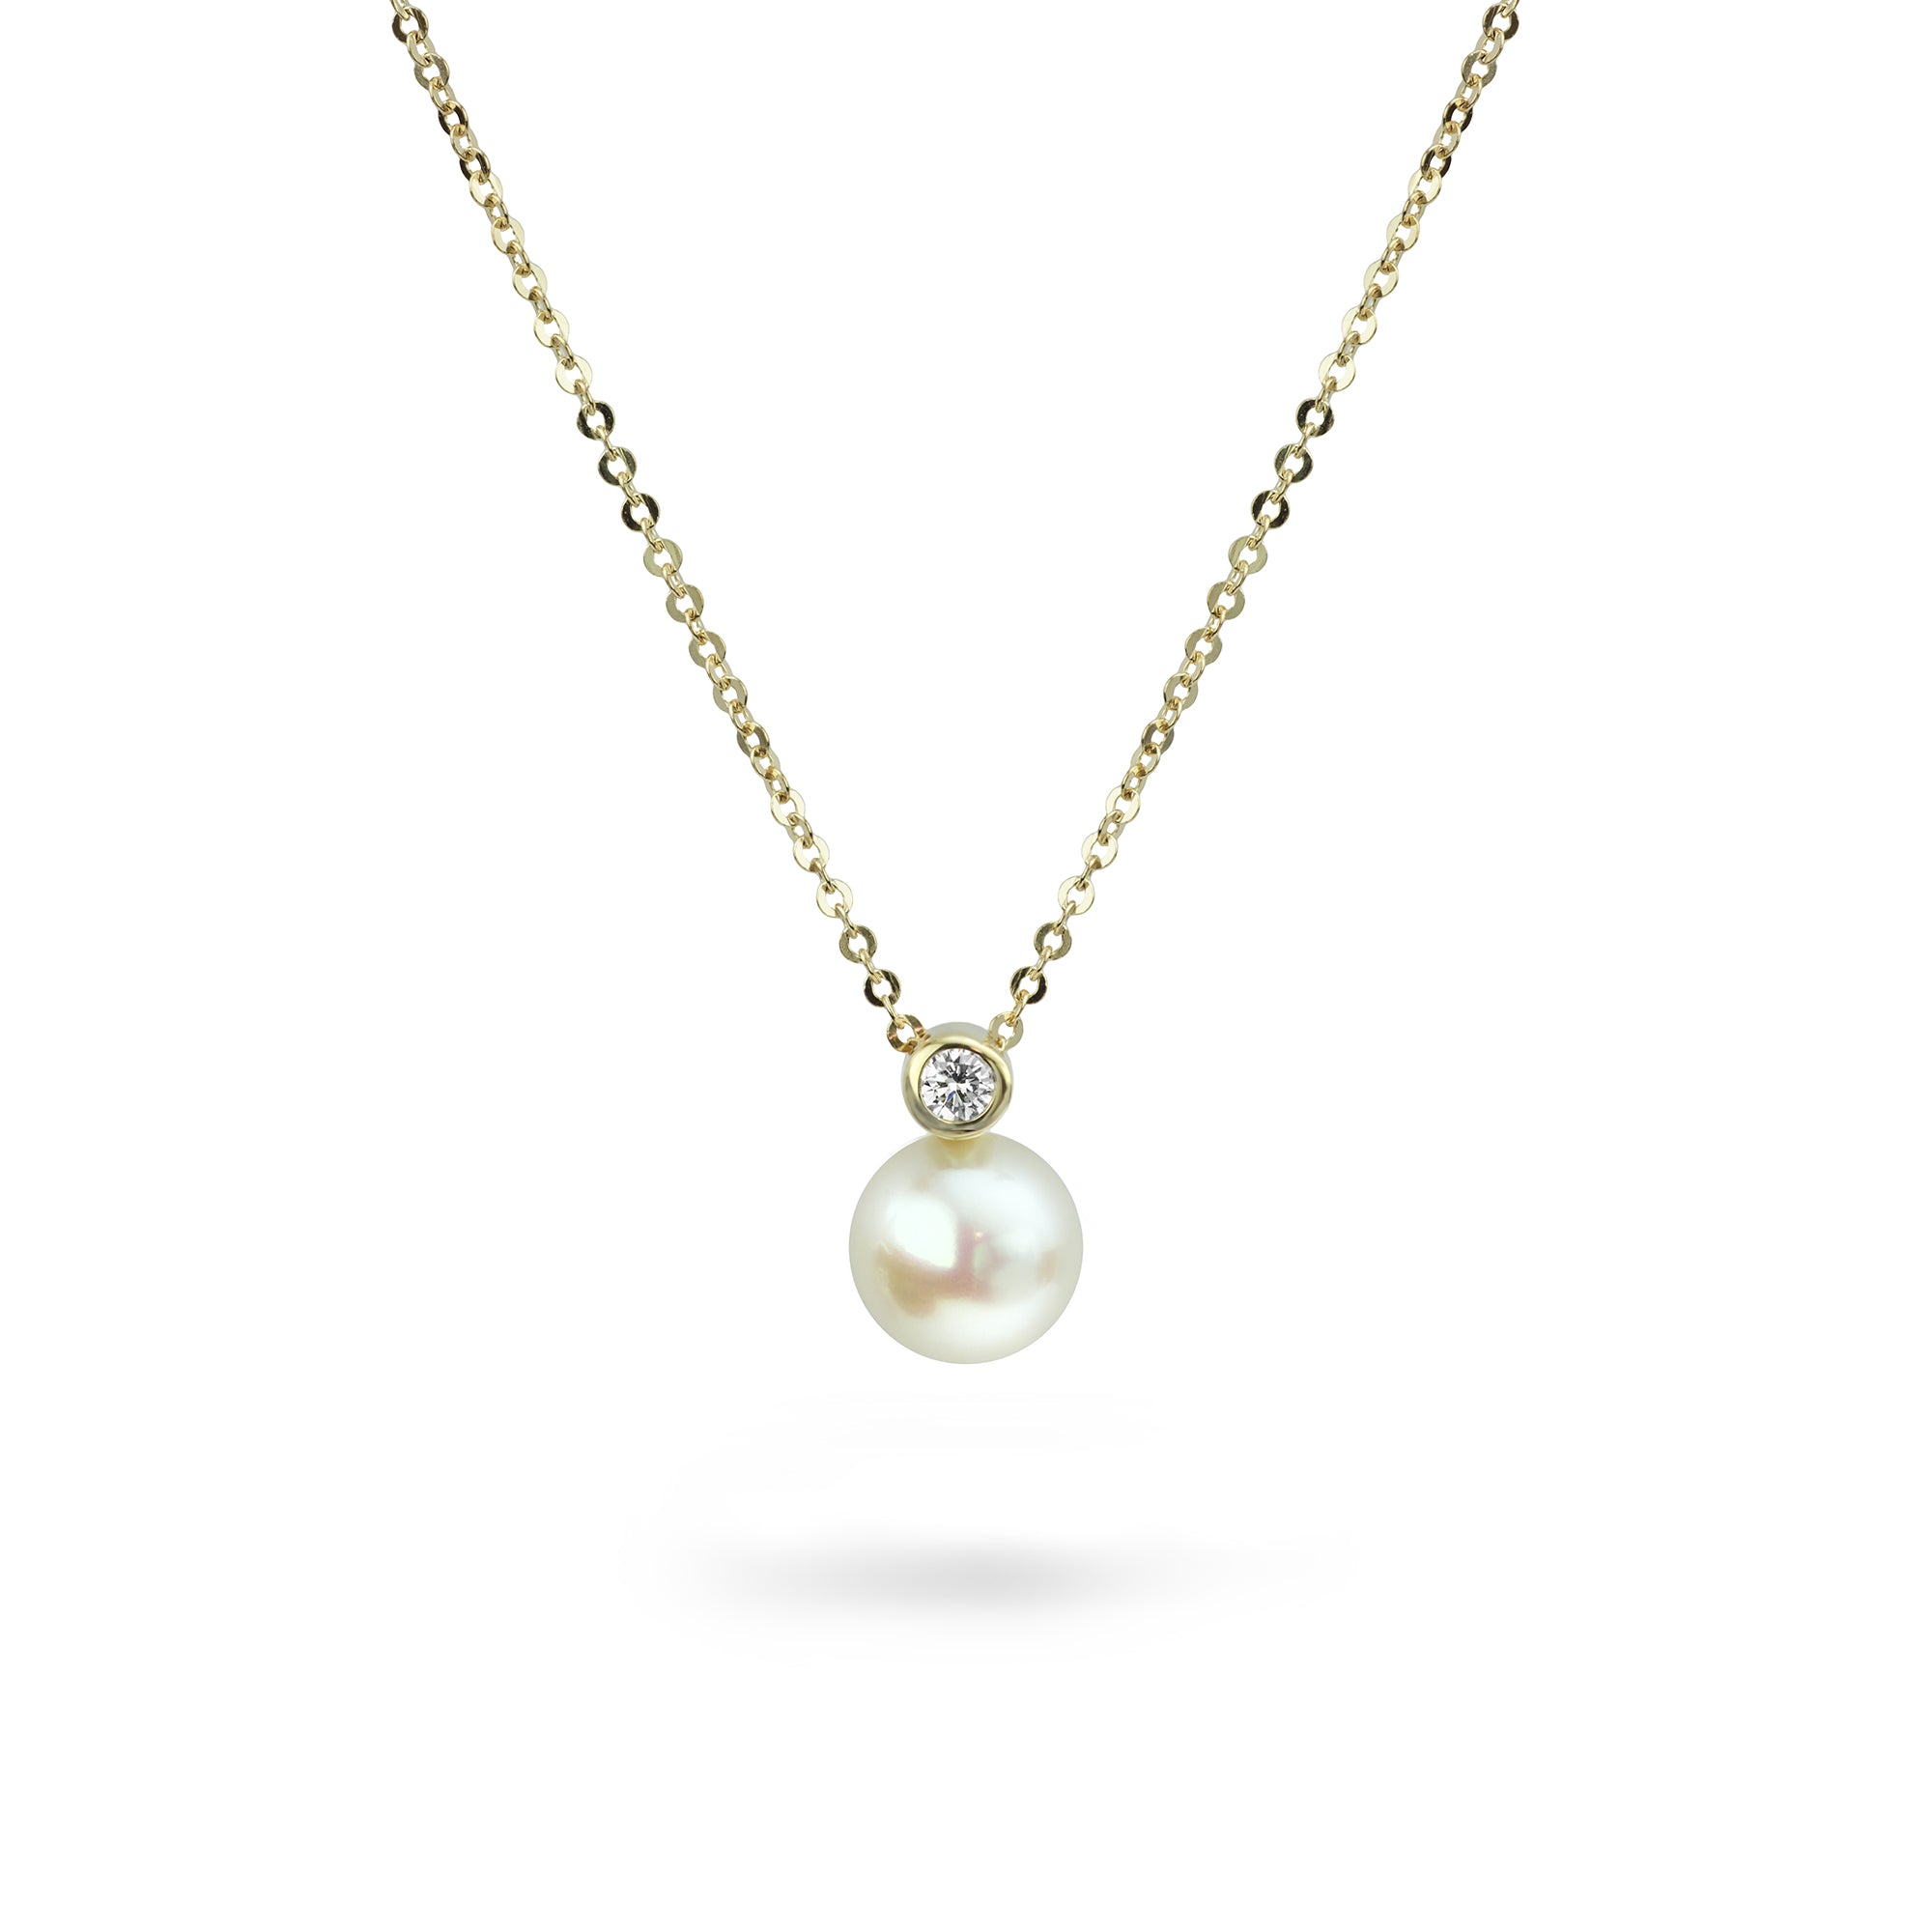 Pearl and Diamond Snowman Necklace